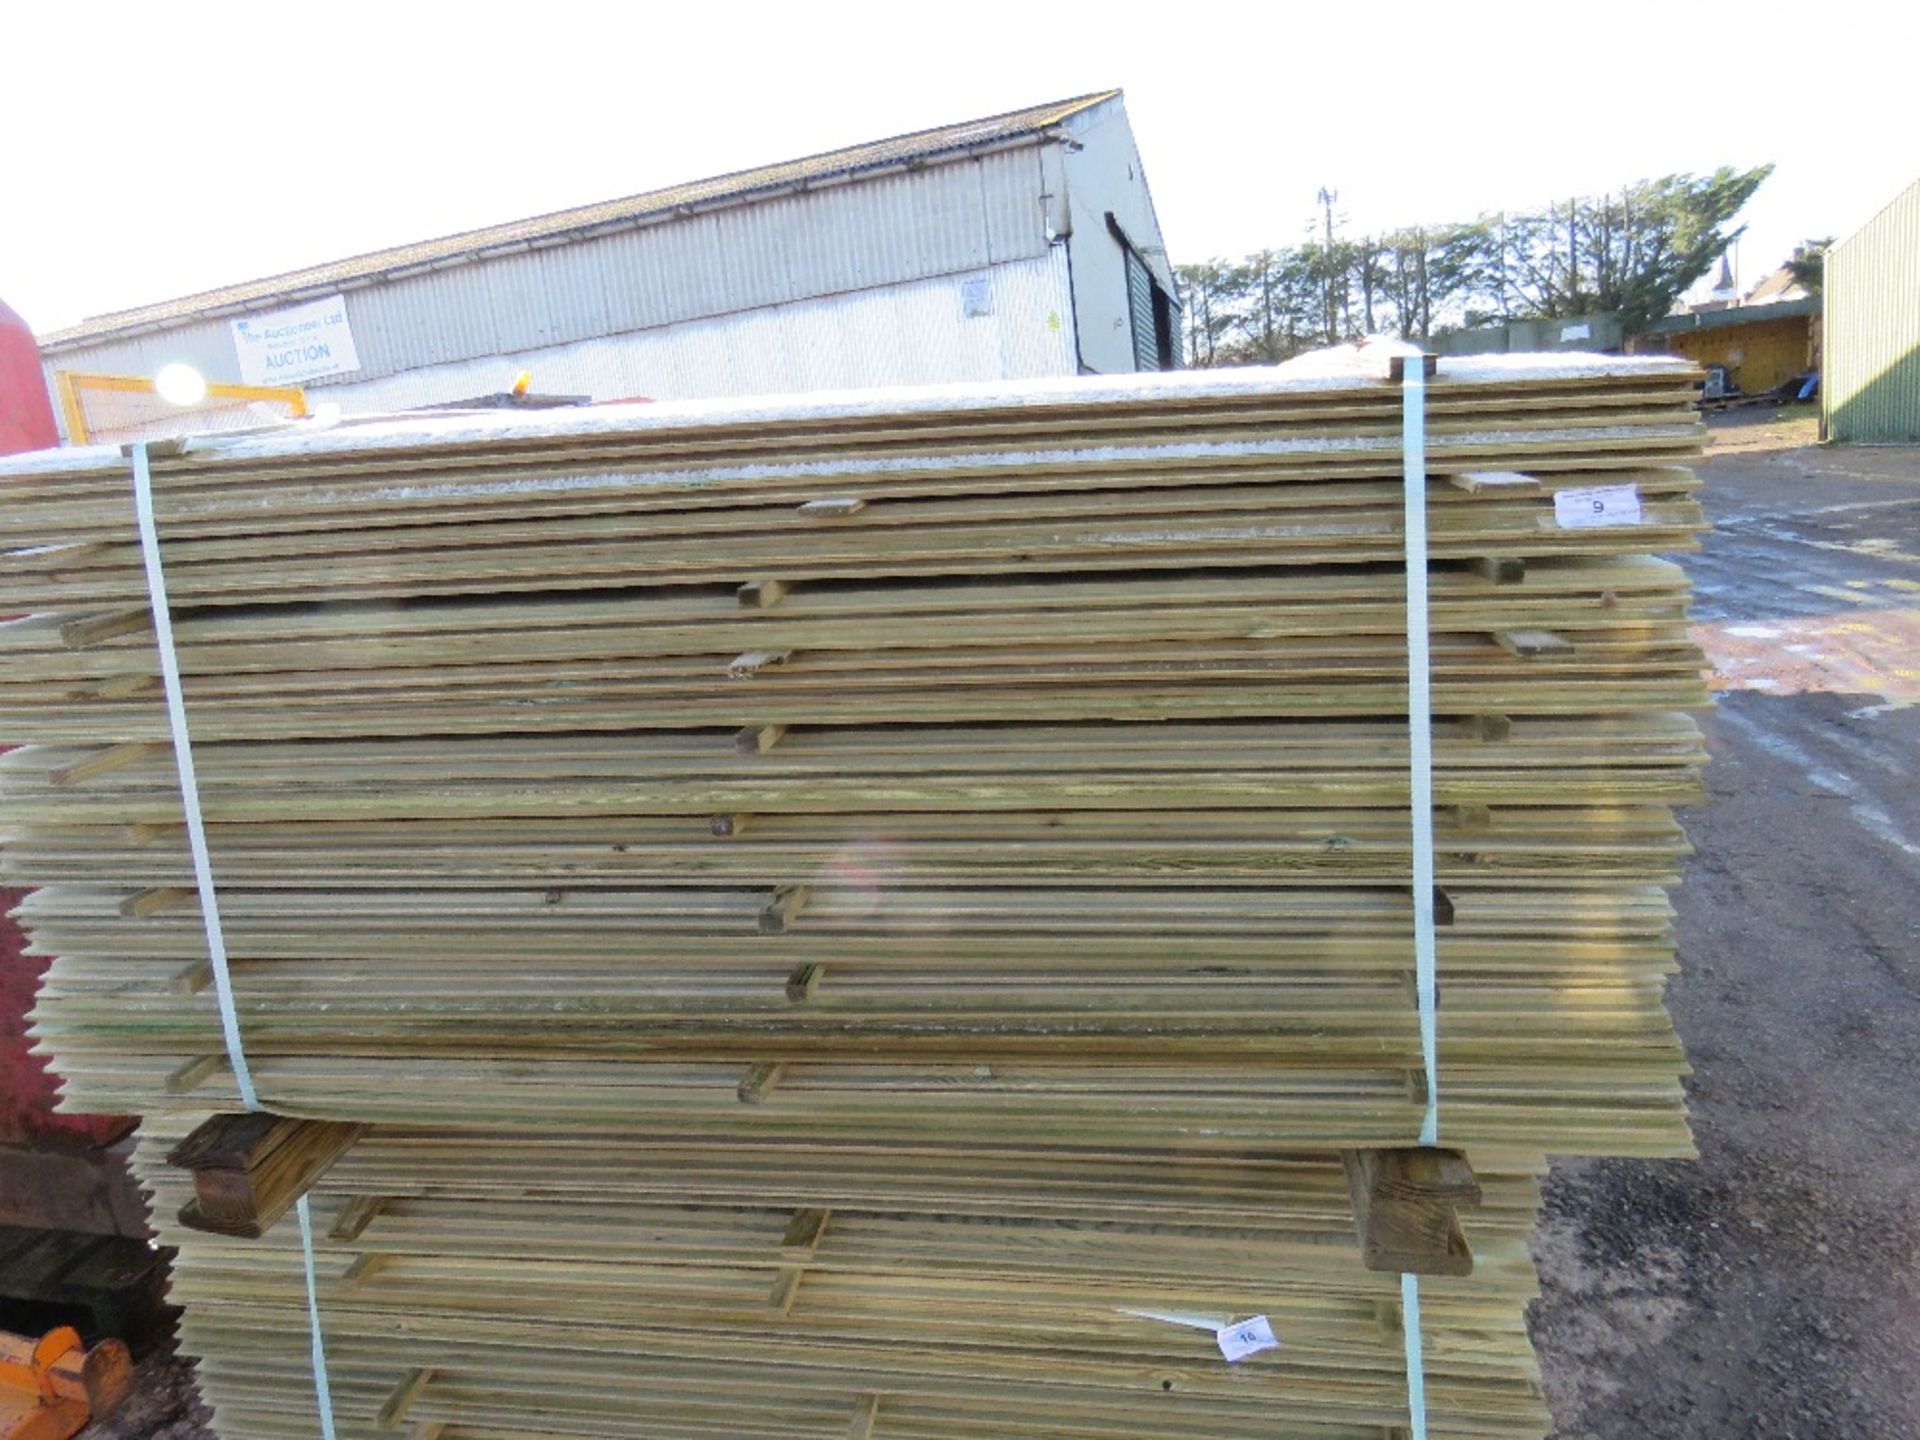 LARGE PACK OF TREATED SHIPLAP FENCE CLADDING TIMBERS. 1.73M X 10CM WIDTH APPROX. - Image 2 of 5